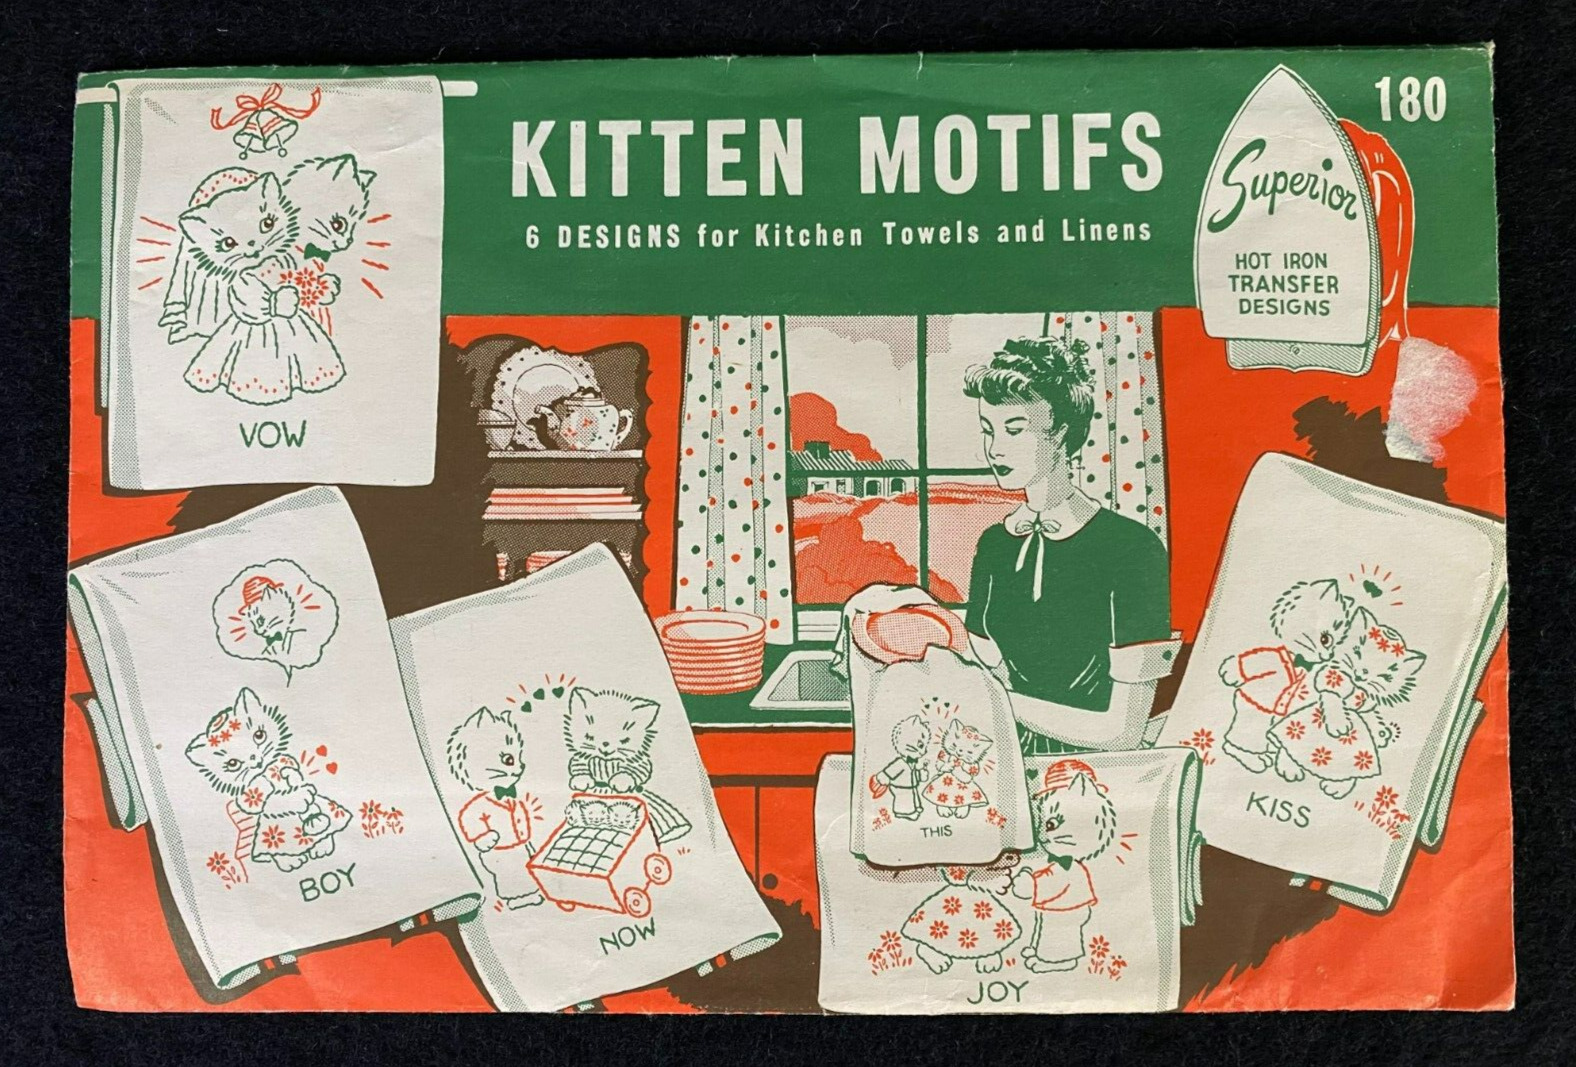 Vintage Superior Embroidery Hot Iron Transfers #180 Kitten Motifs Uncut 1950s